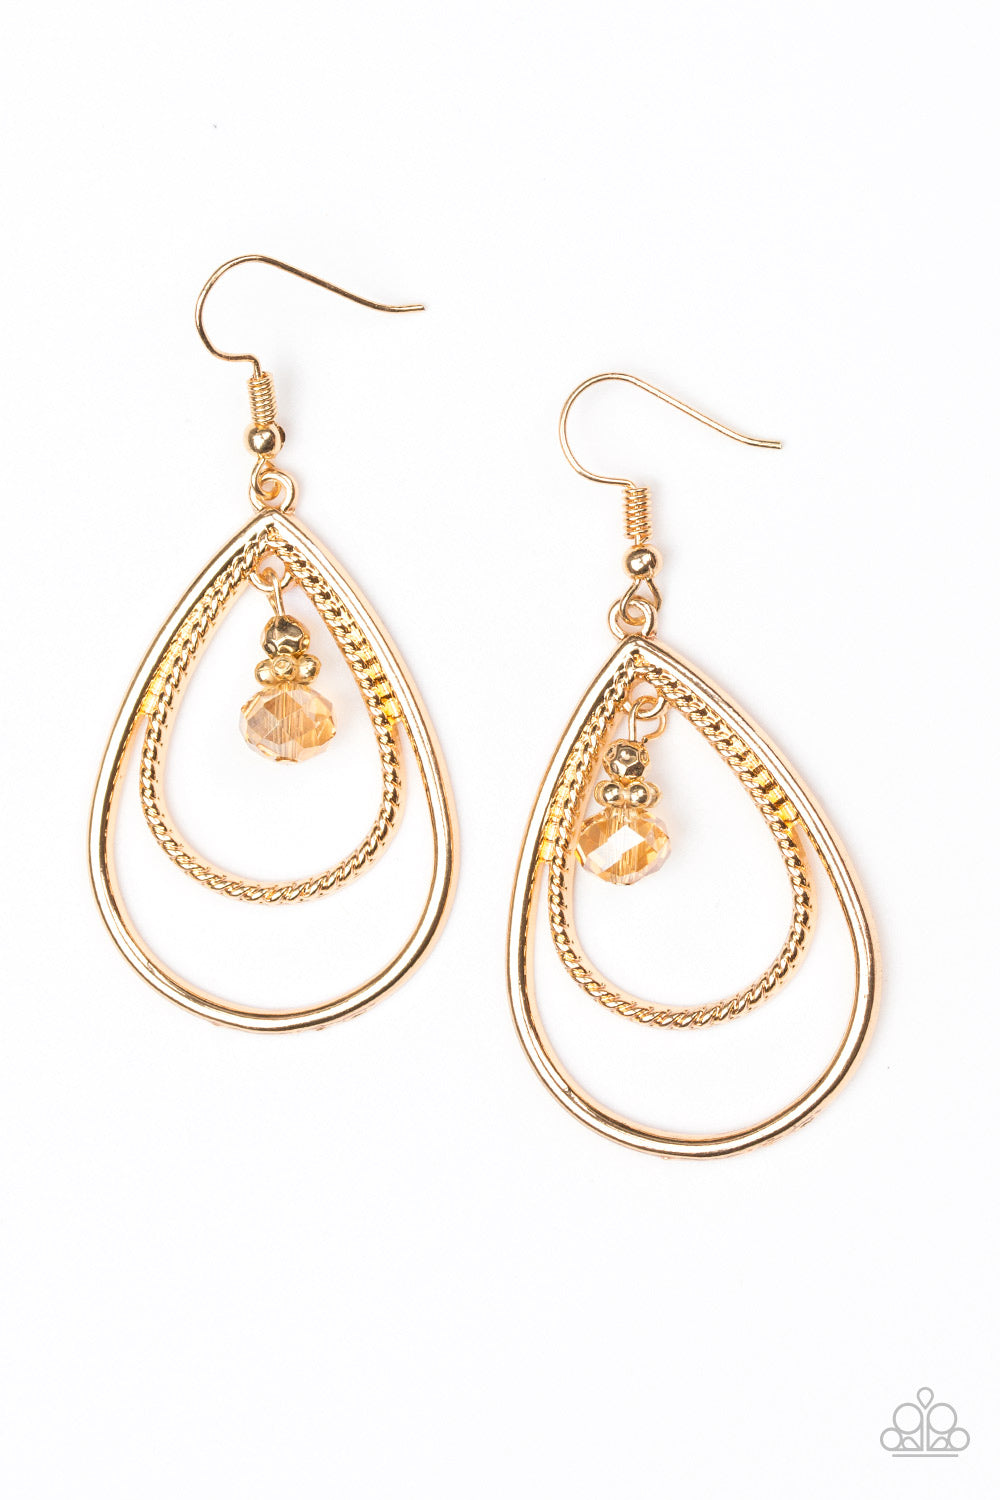 REIGN On My Parade - Gold Earrings - Princess Glam Shop